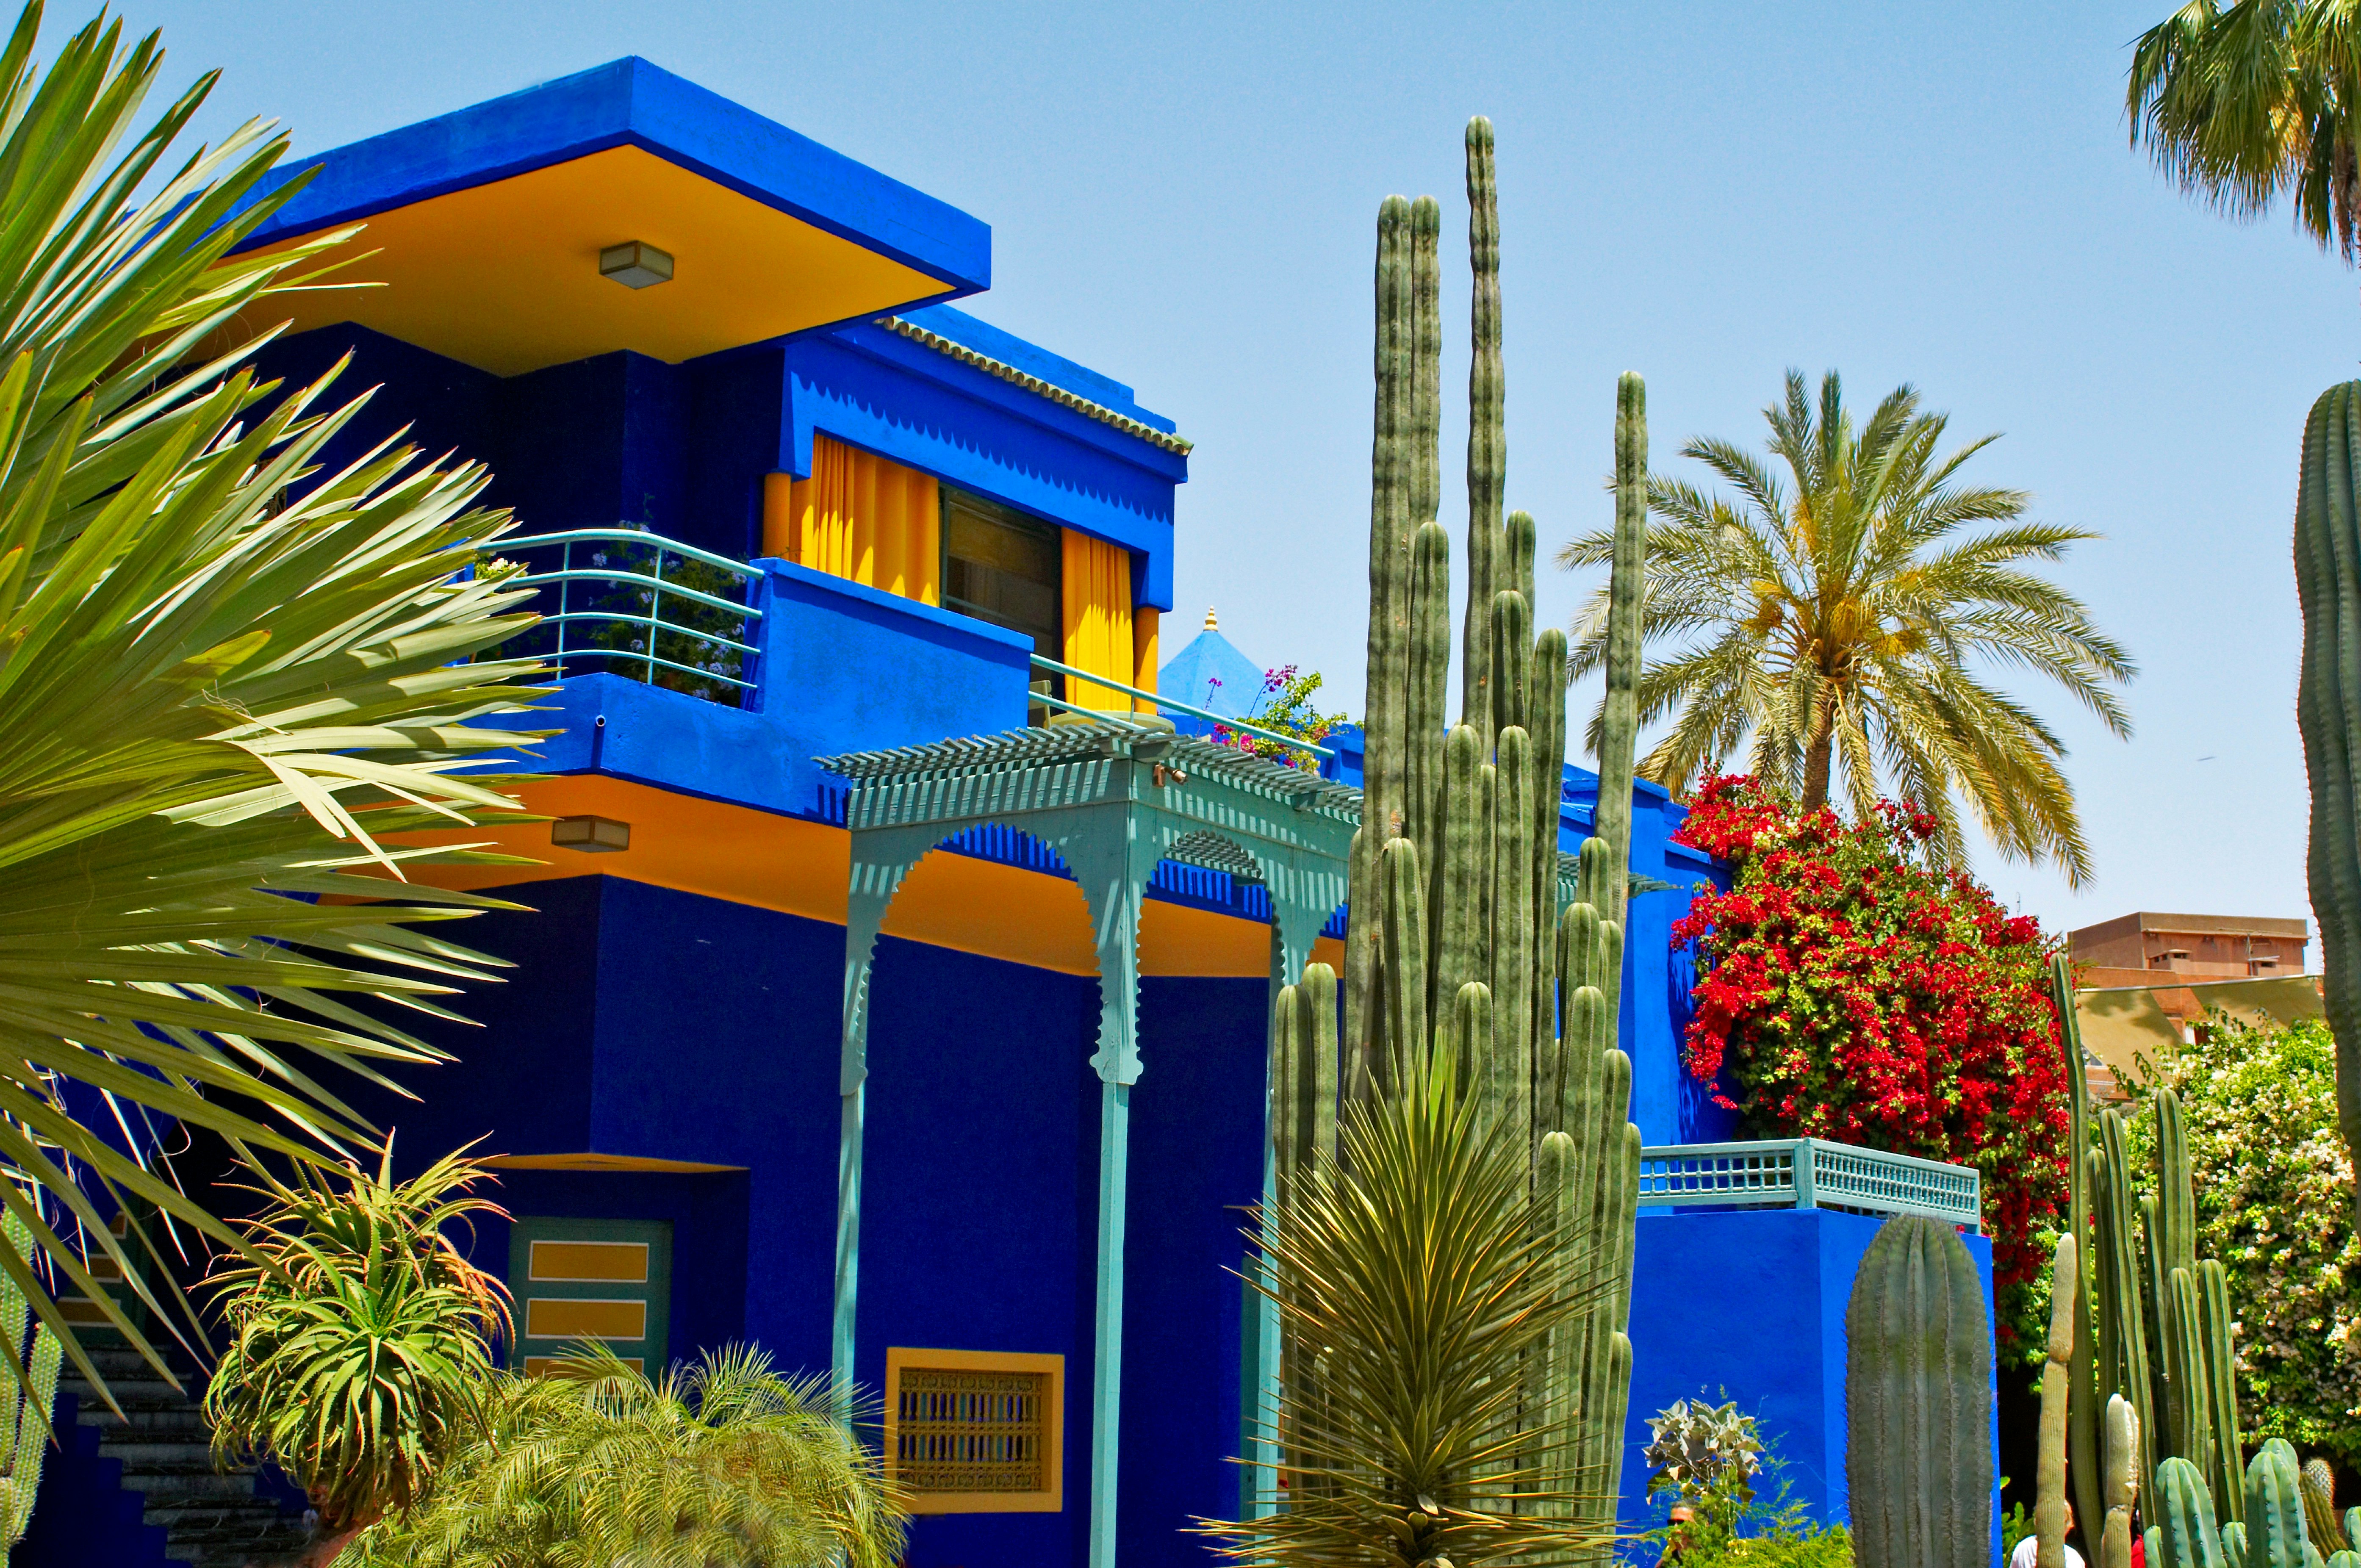 Colourful modern exterior of the Jardin Majorelle museum building with varied plants in the garden